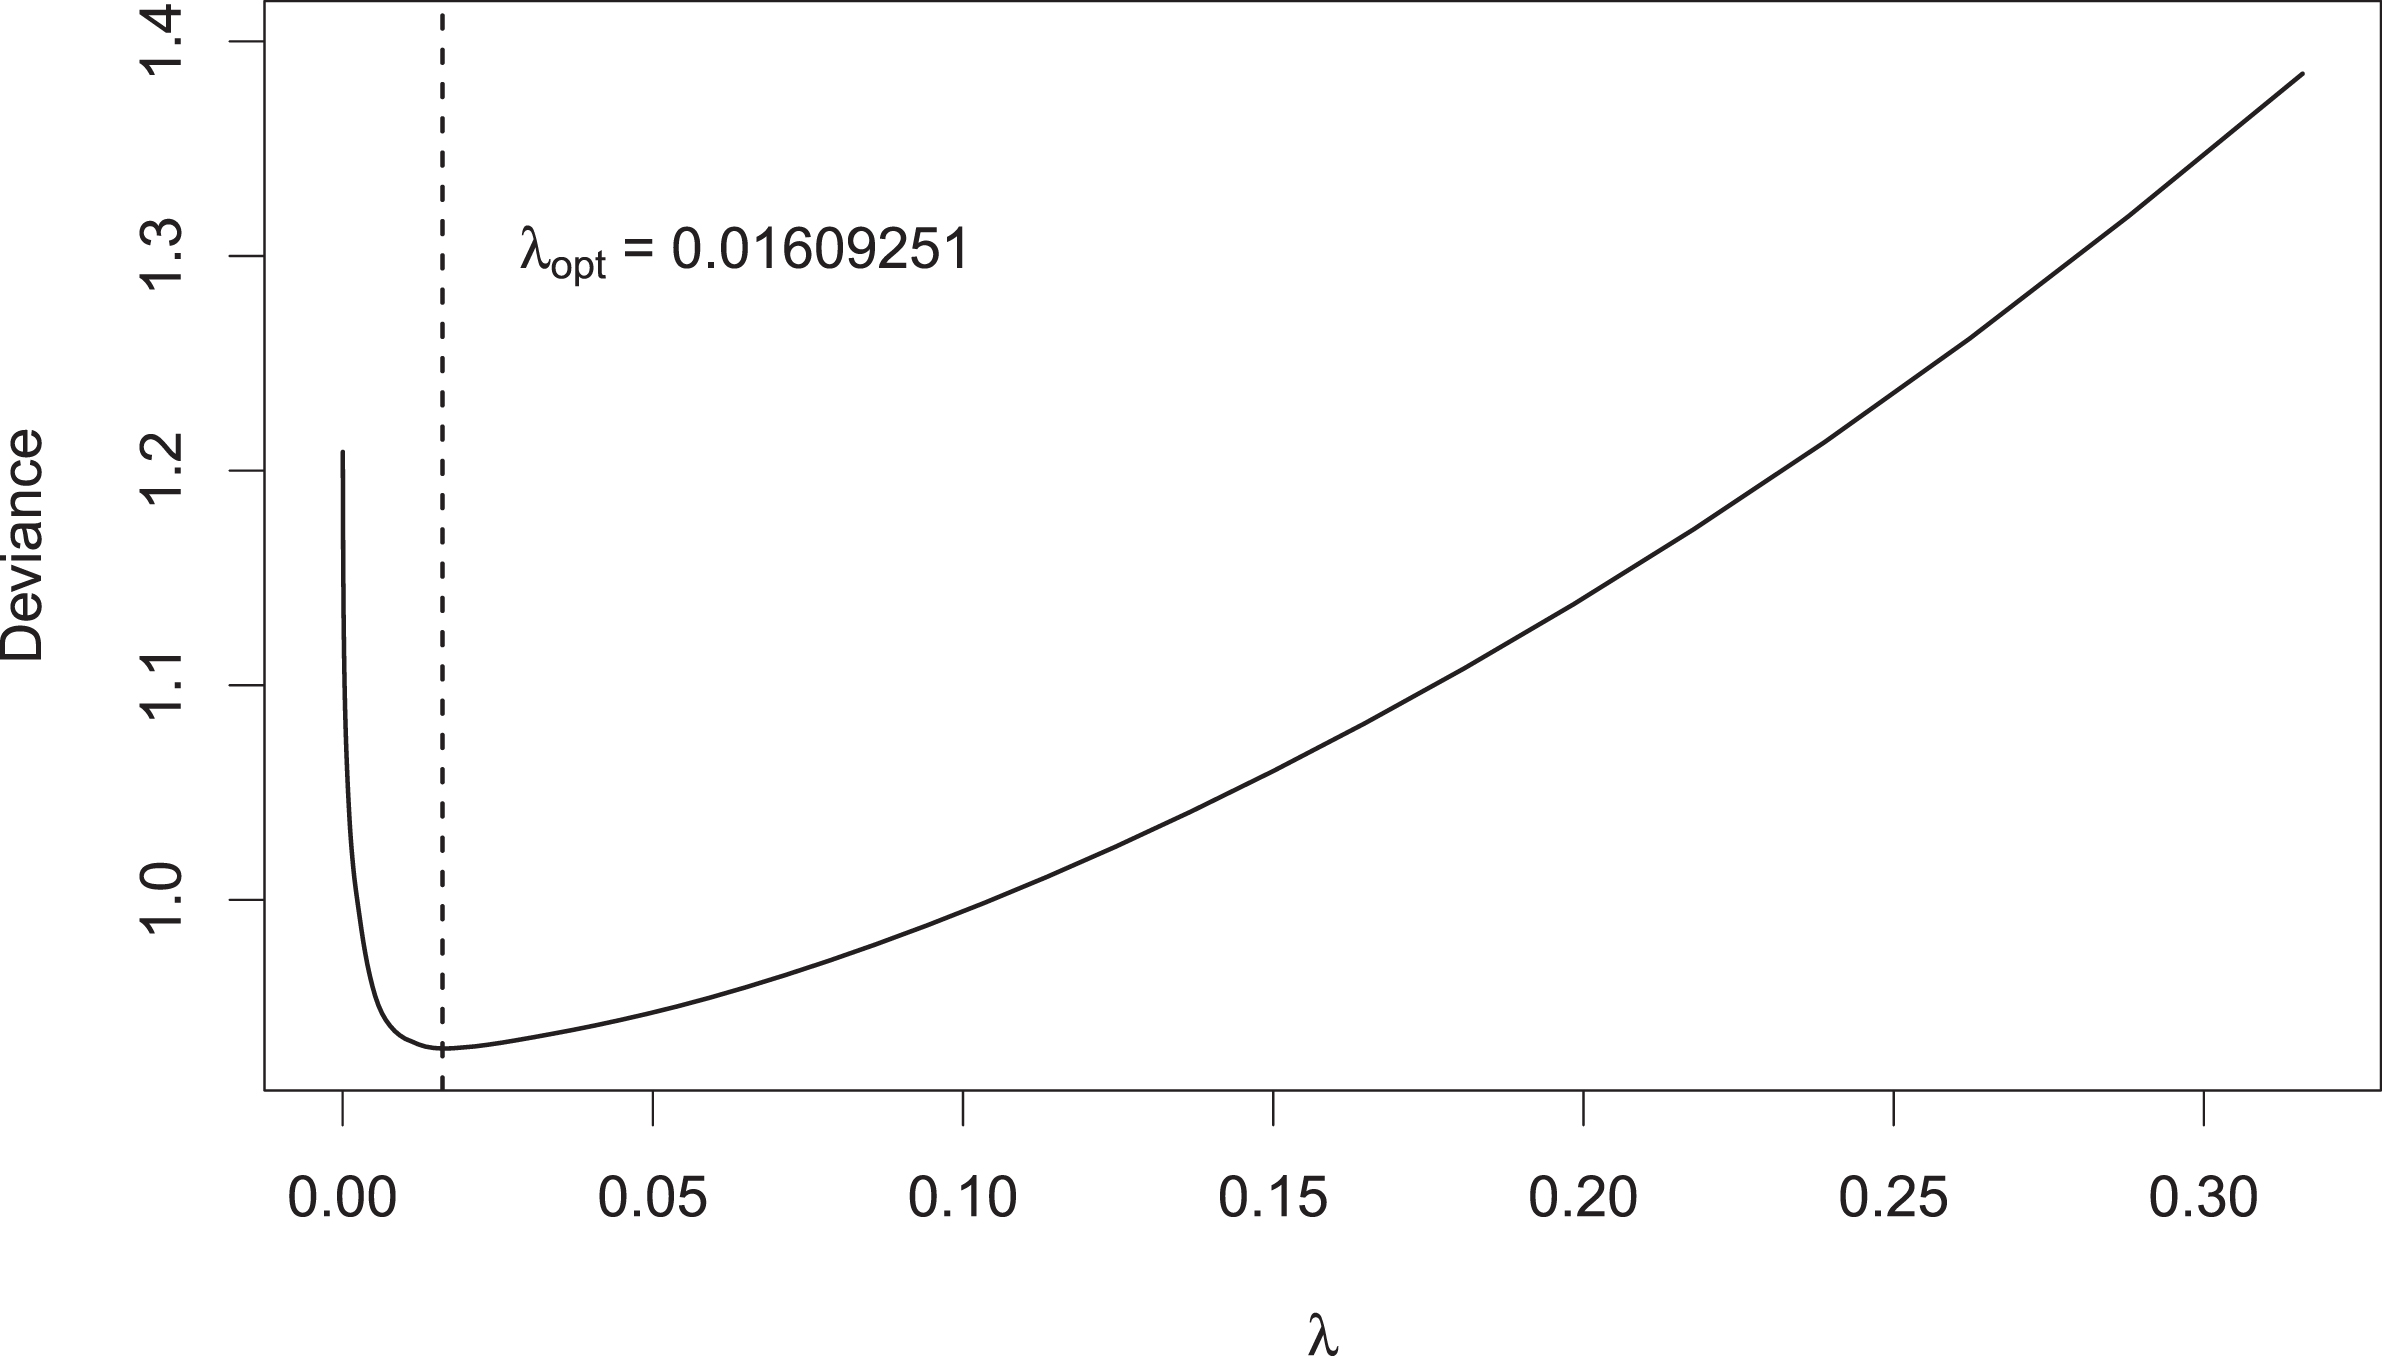 CV-deviance of LASSO-model as a function of λ; vertical dashed line: λopt.